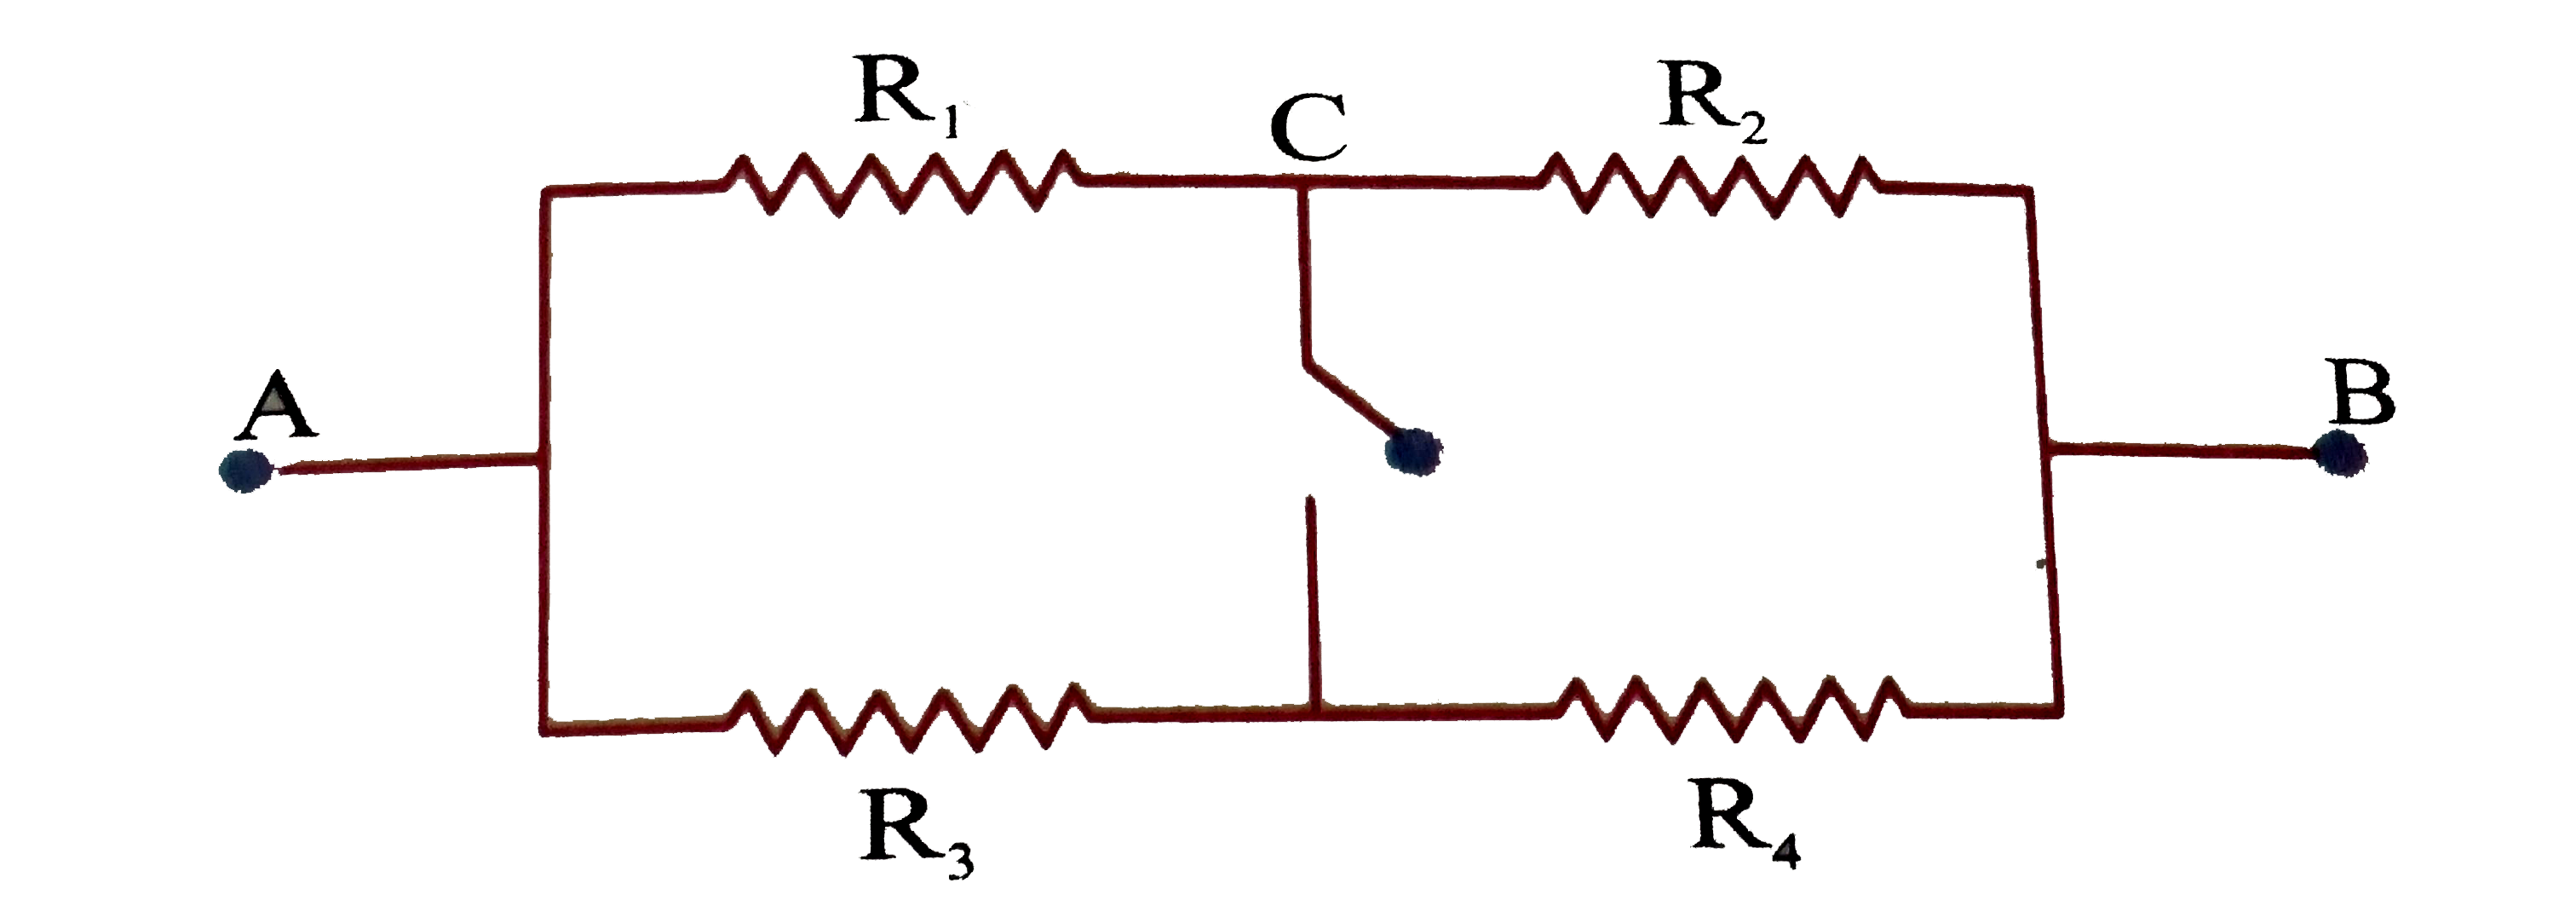 Four resistors R(1),R(2),R(3) and R(4) are connected between two terminals A and B iin a network as shown in the diagram. A key K can connect the two points (see diagram) C and D. A constant potential difference (V(A)-V(B))=V is maintained between thhe points A and B   Q. If V=25,R(1)=1Omega,R(2)=2Omega,R(3)=3Omega and R(4)=4Omega the current that will flow from C to D on connecting key K is